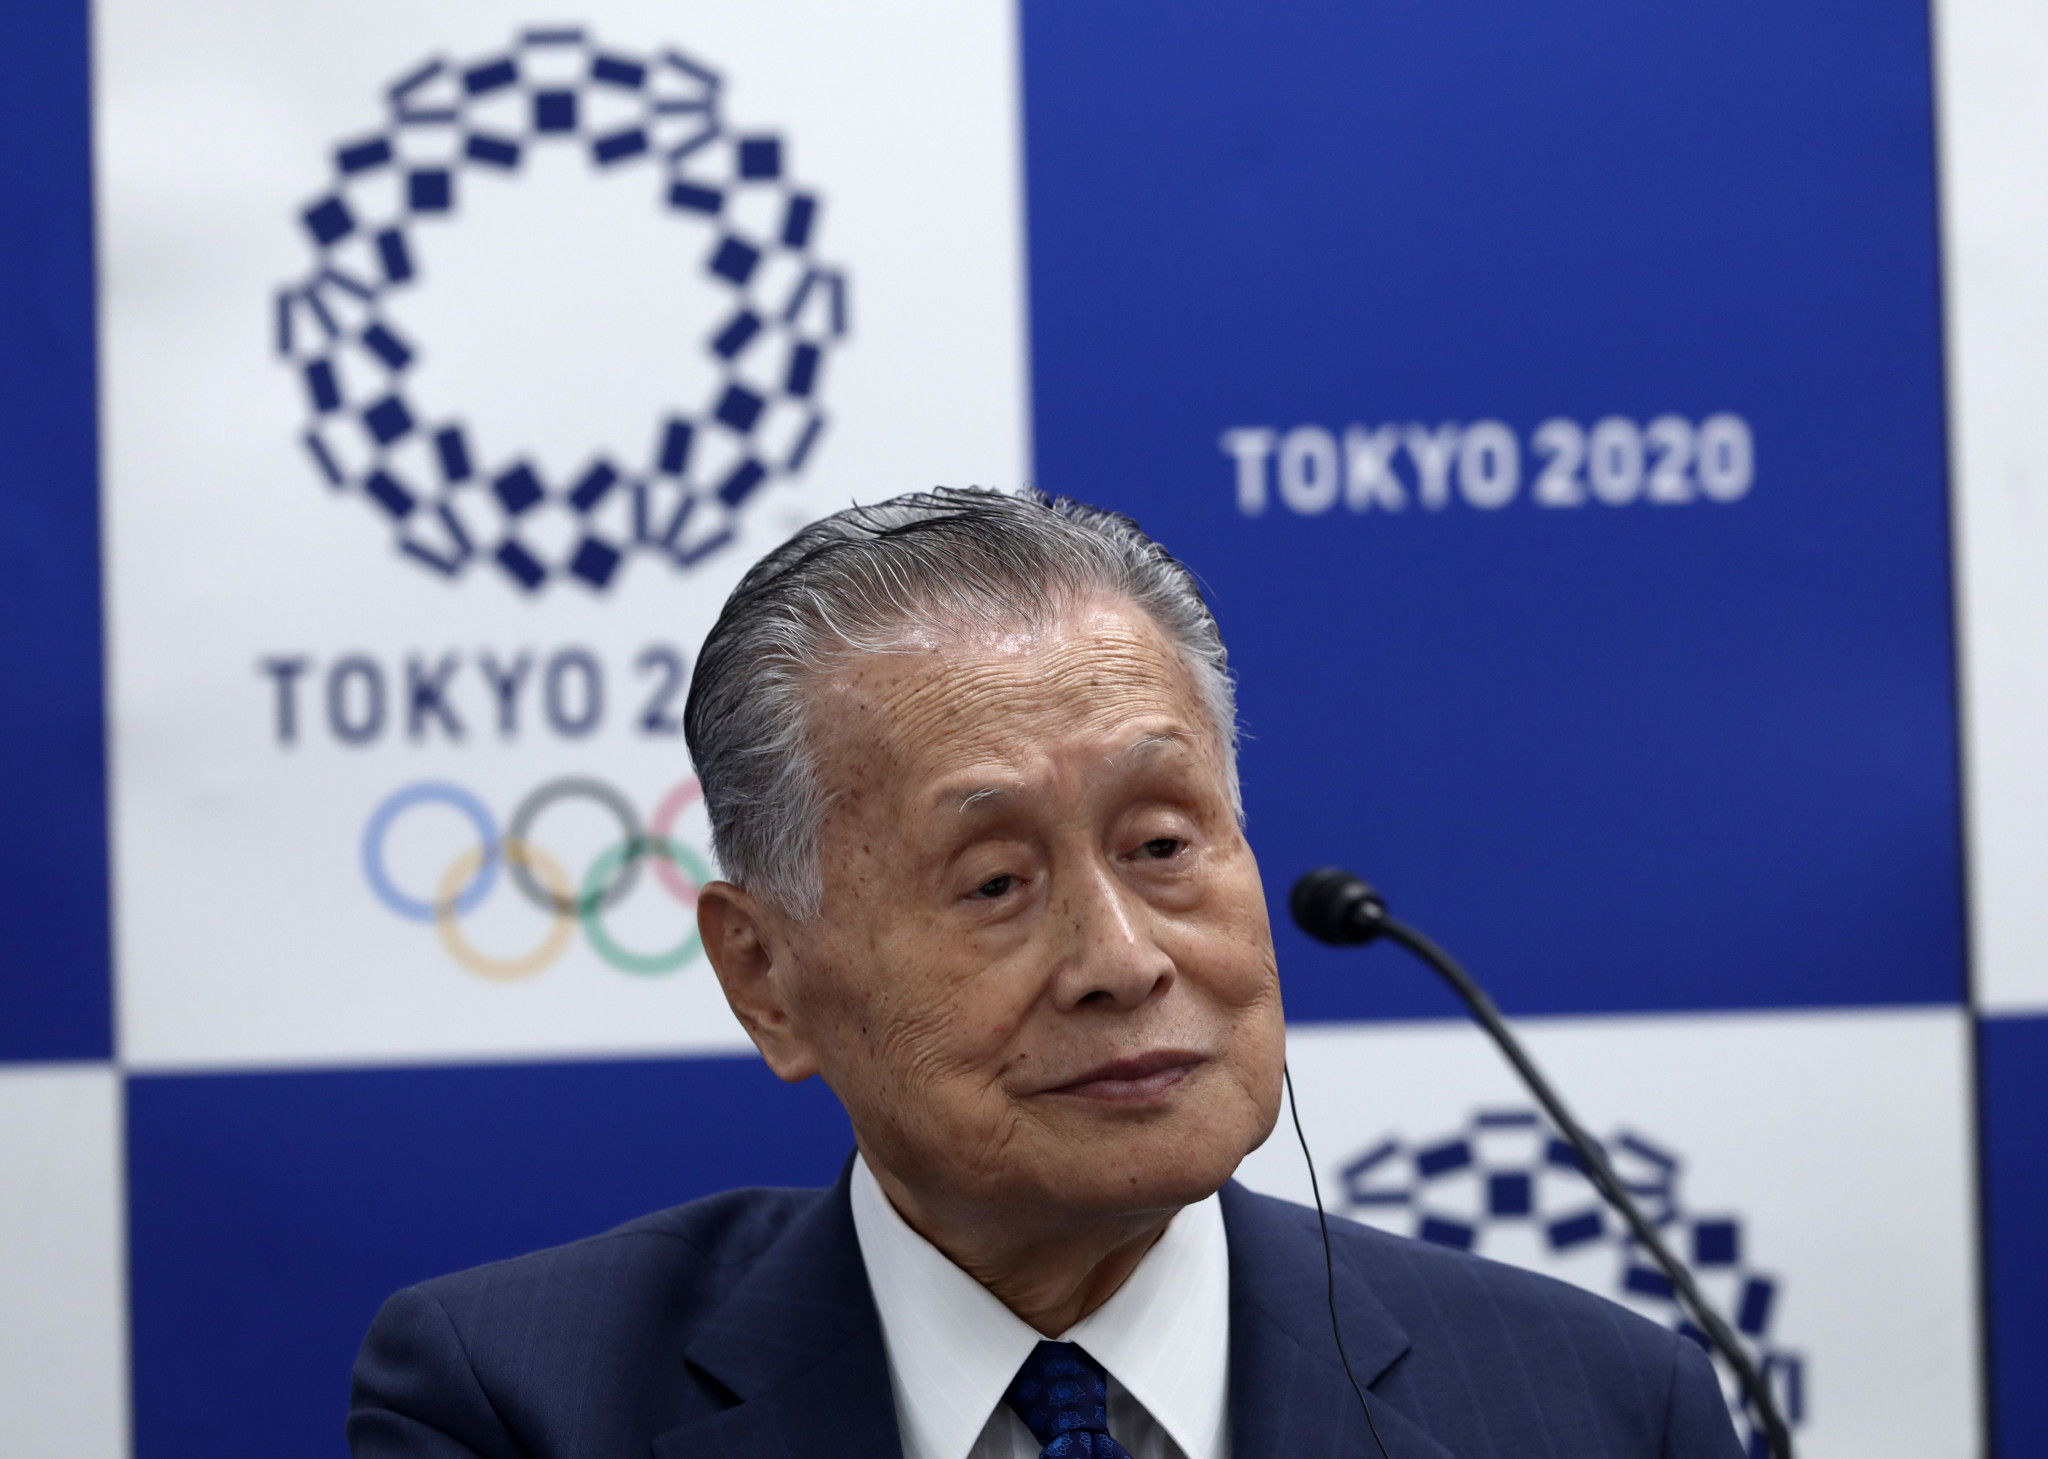 Tokyo 2020 President Yoshirō Mori says the Organising Committee is confident Morisawa will provide valuable support through the design of unique fonts for the Olympic and Paralympic Games ©Getty Images